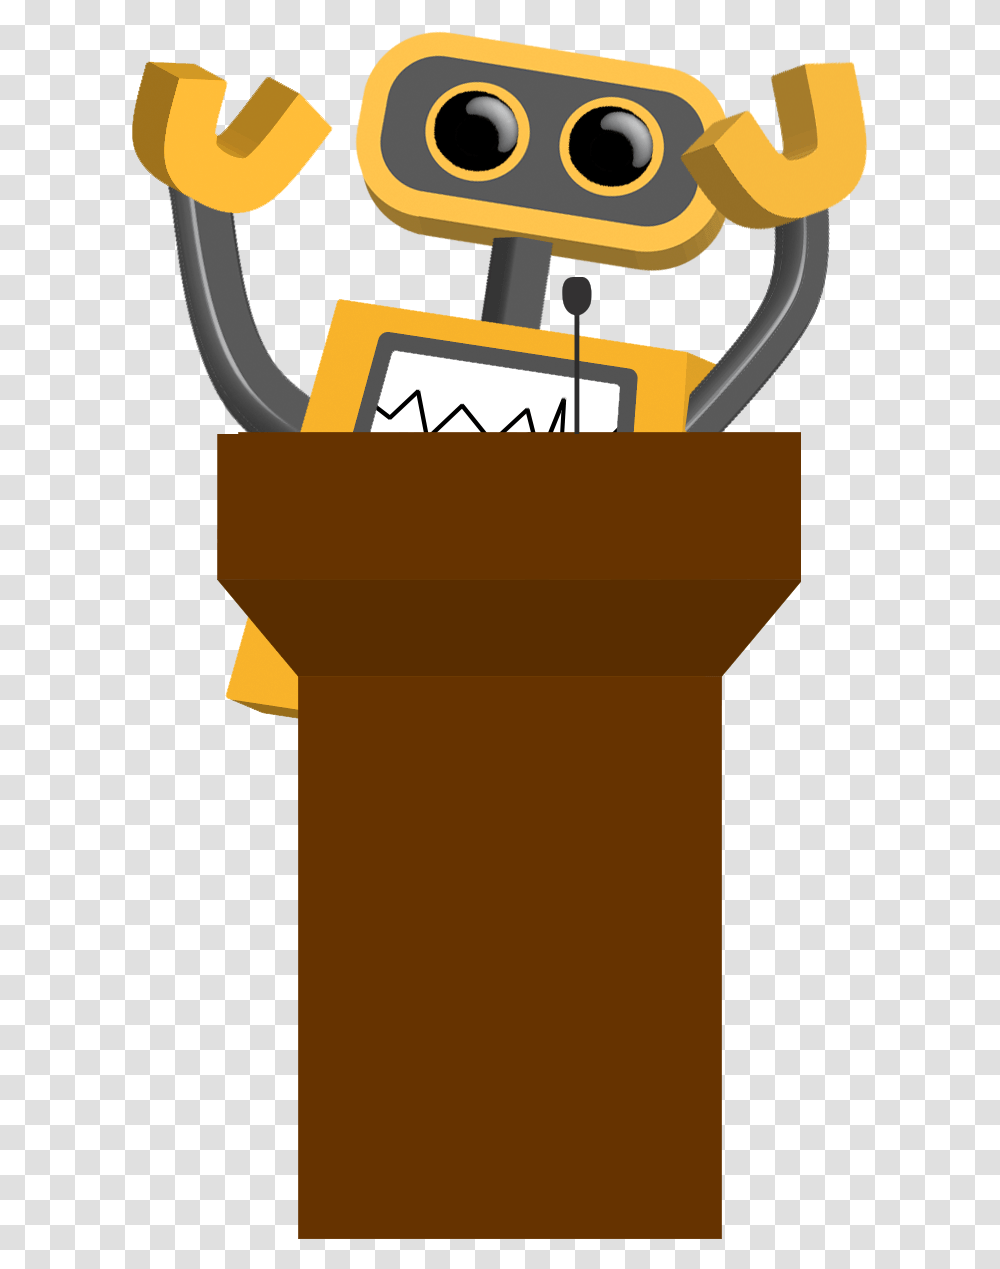 At The Podium Background Robot Clipart Animated Background Robots Gif, Audience, Crowd, Speech, Mailbox Transparent Png